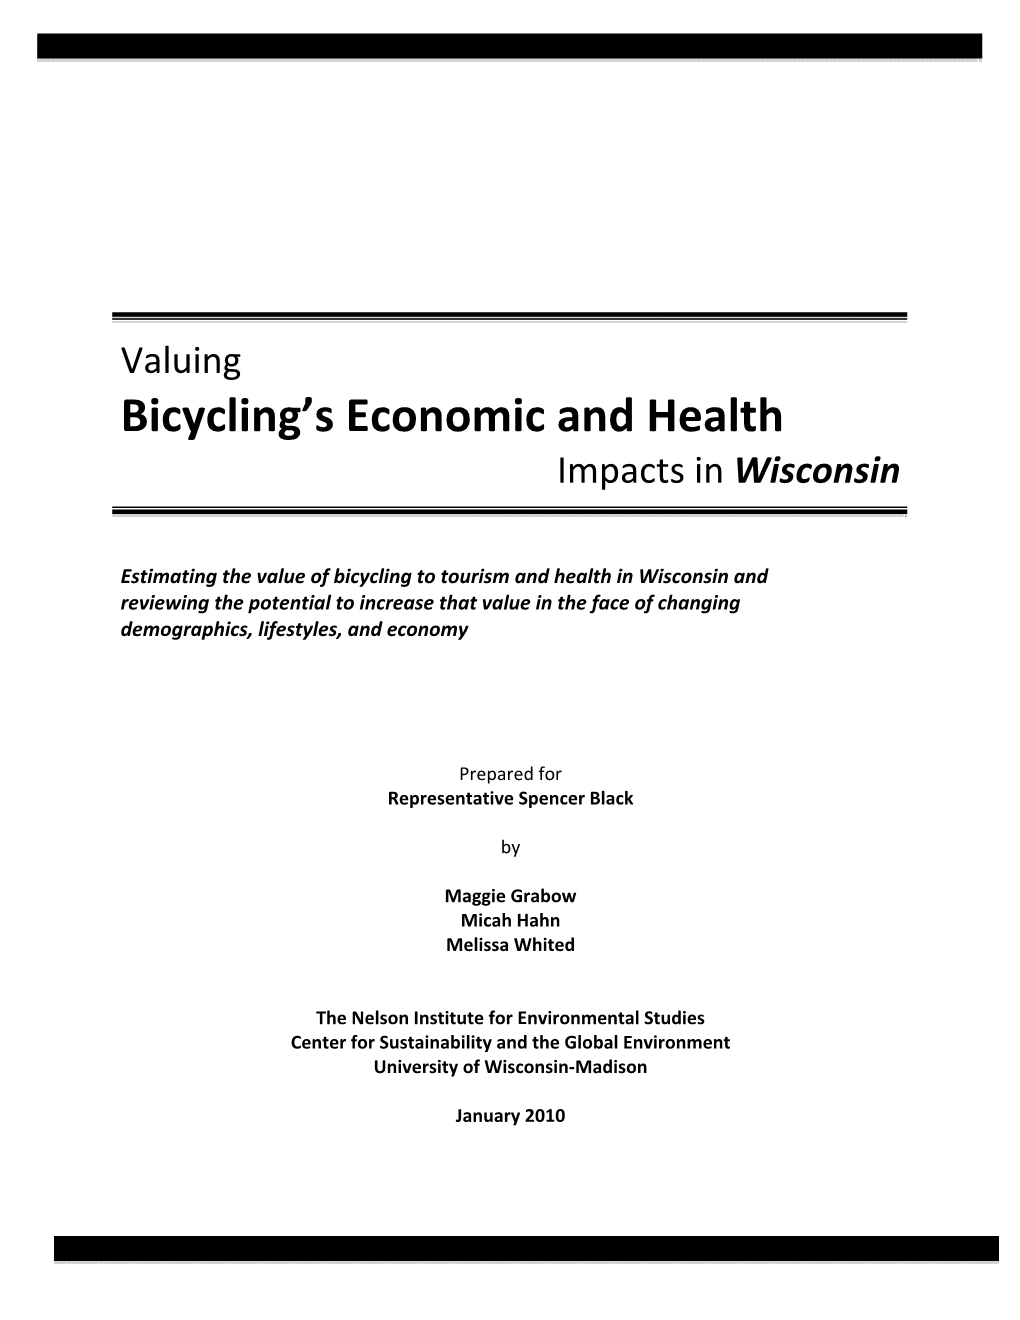 Valuing Bicycling’S Economic and Health Impacts in Wisconsin